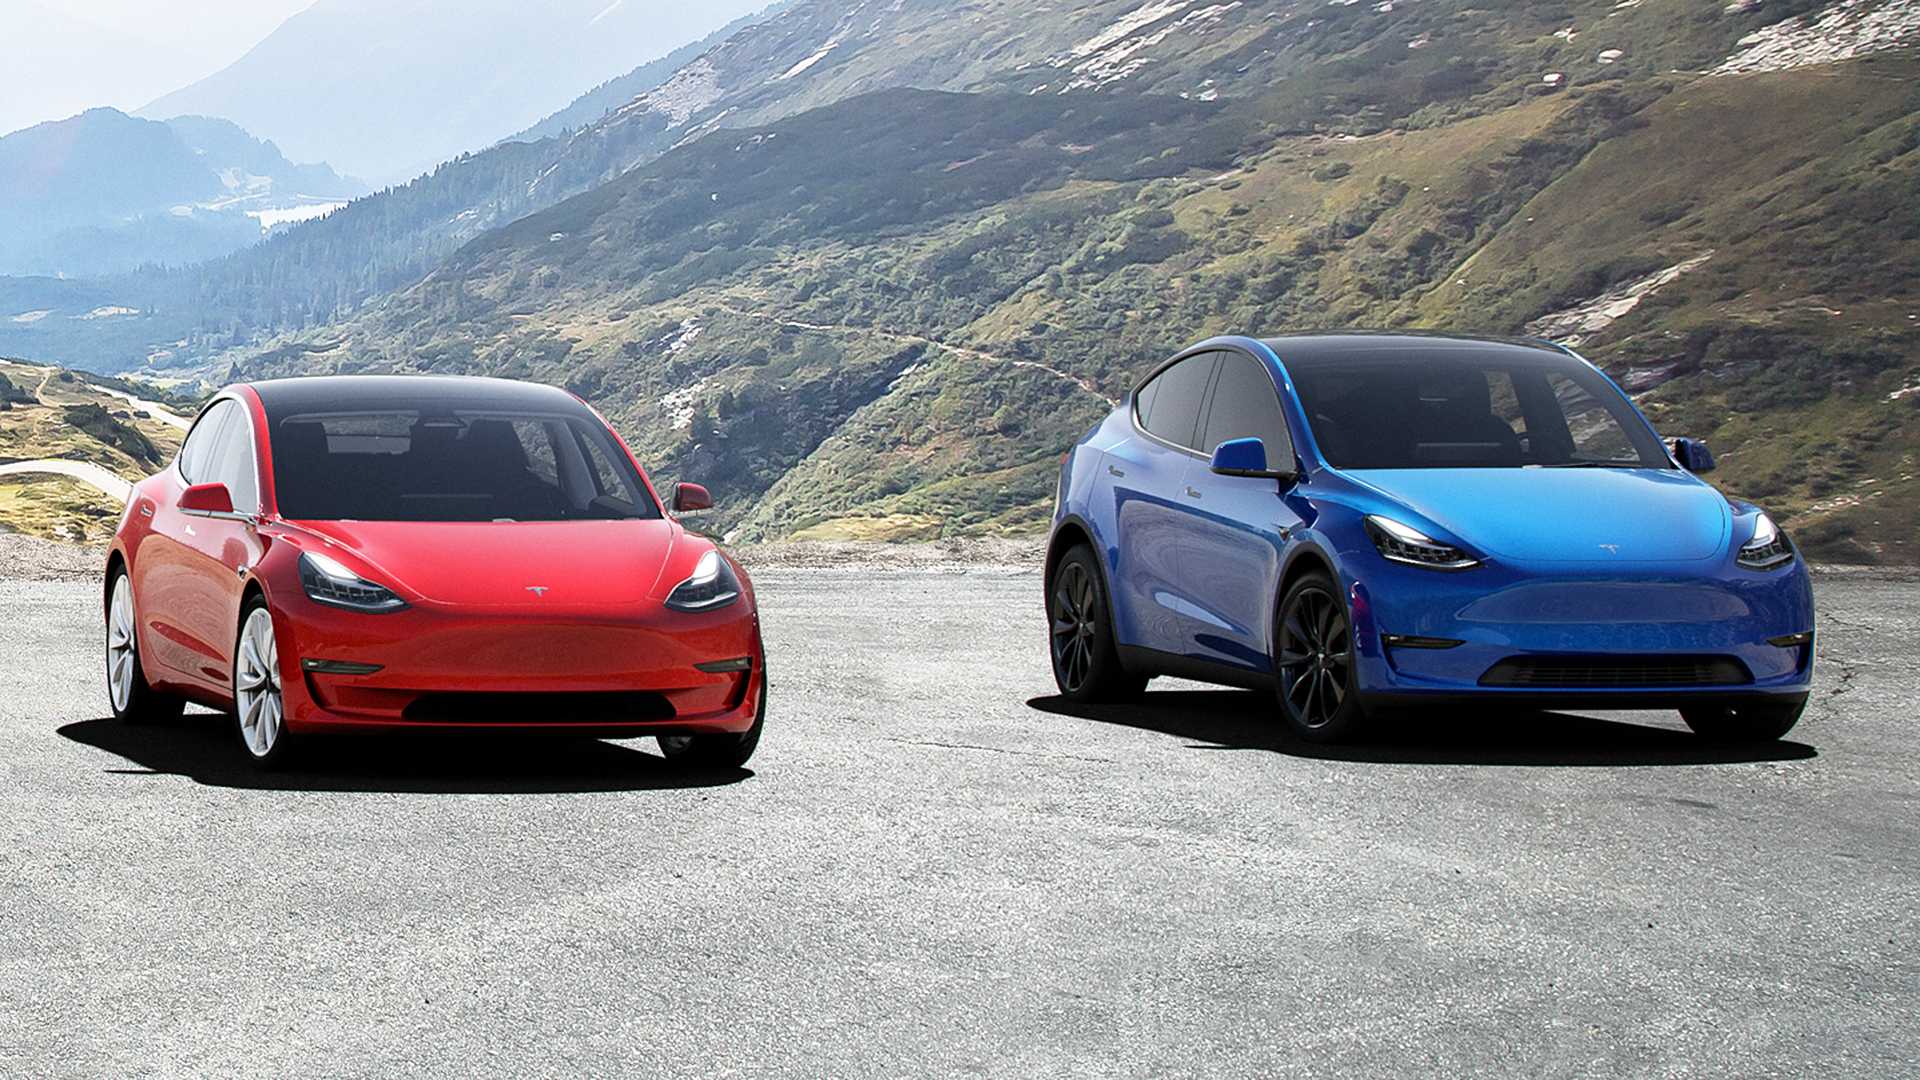 Tesla Model Y & Model 3 Top Segment Sales in California for Q1-Q3 2020, Model 3 Outsells BMW 3-Series by 4x+